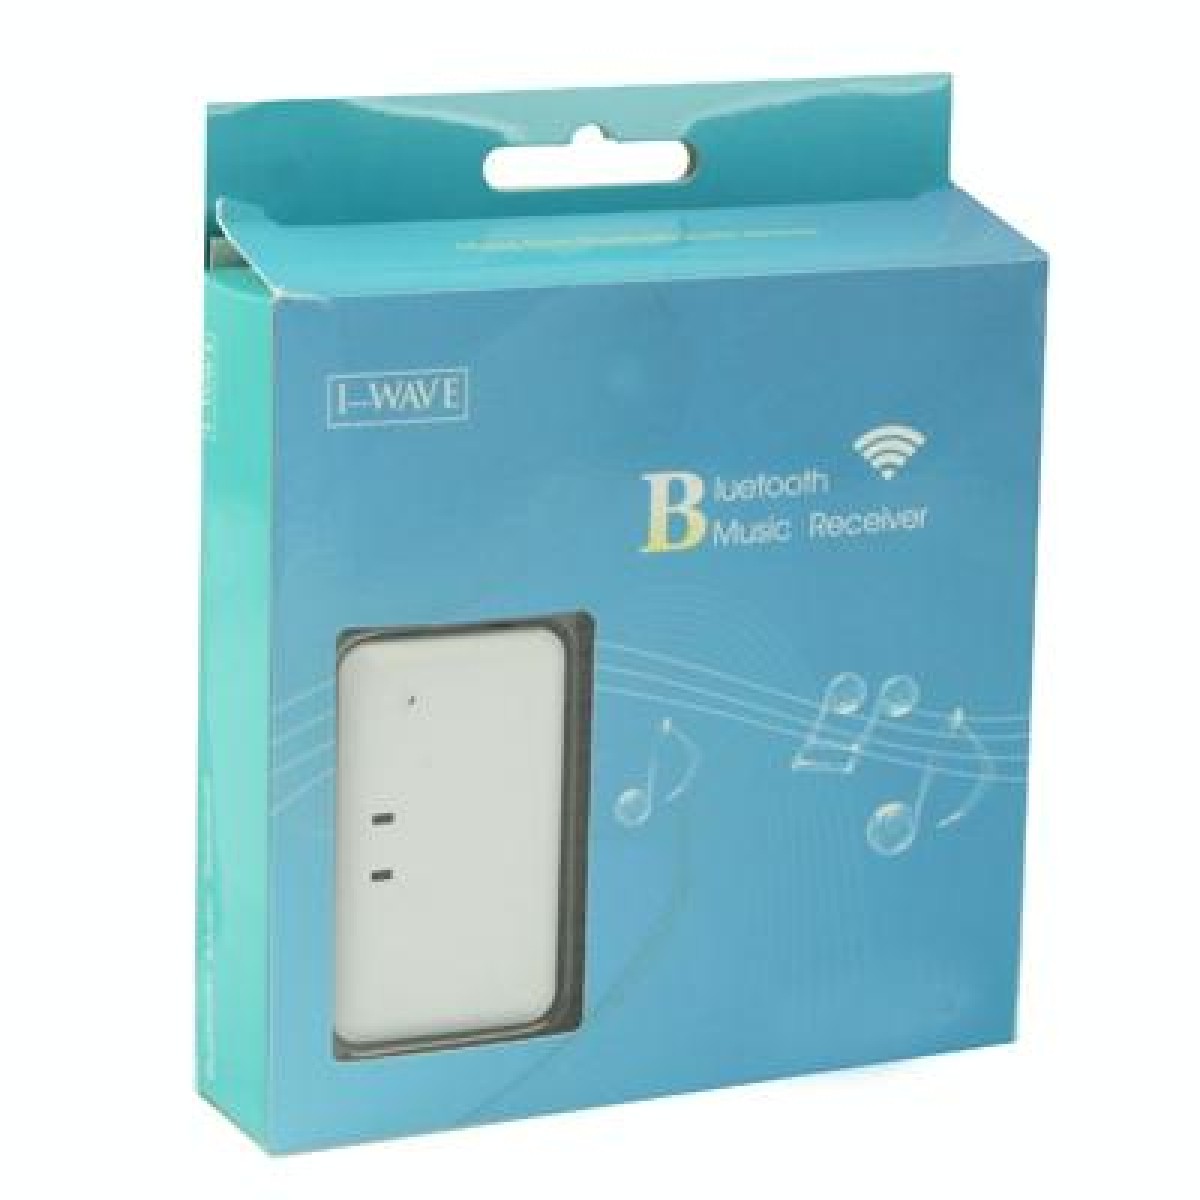 Mini Bluetooth Music Receiver for iPhone 4 & 4S / 3GS / 3G / iPad 3 / iPad 2 / Other Bluetooth Phones & PC, Size: 60 x 36 x 15mm (White)